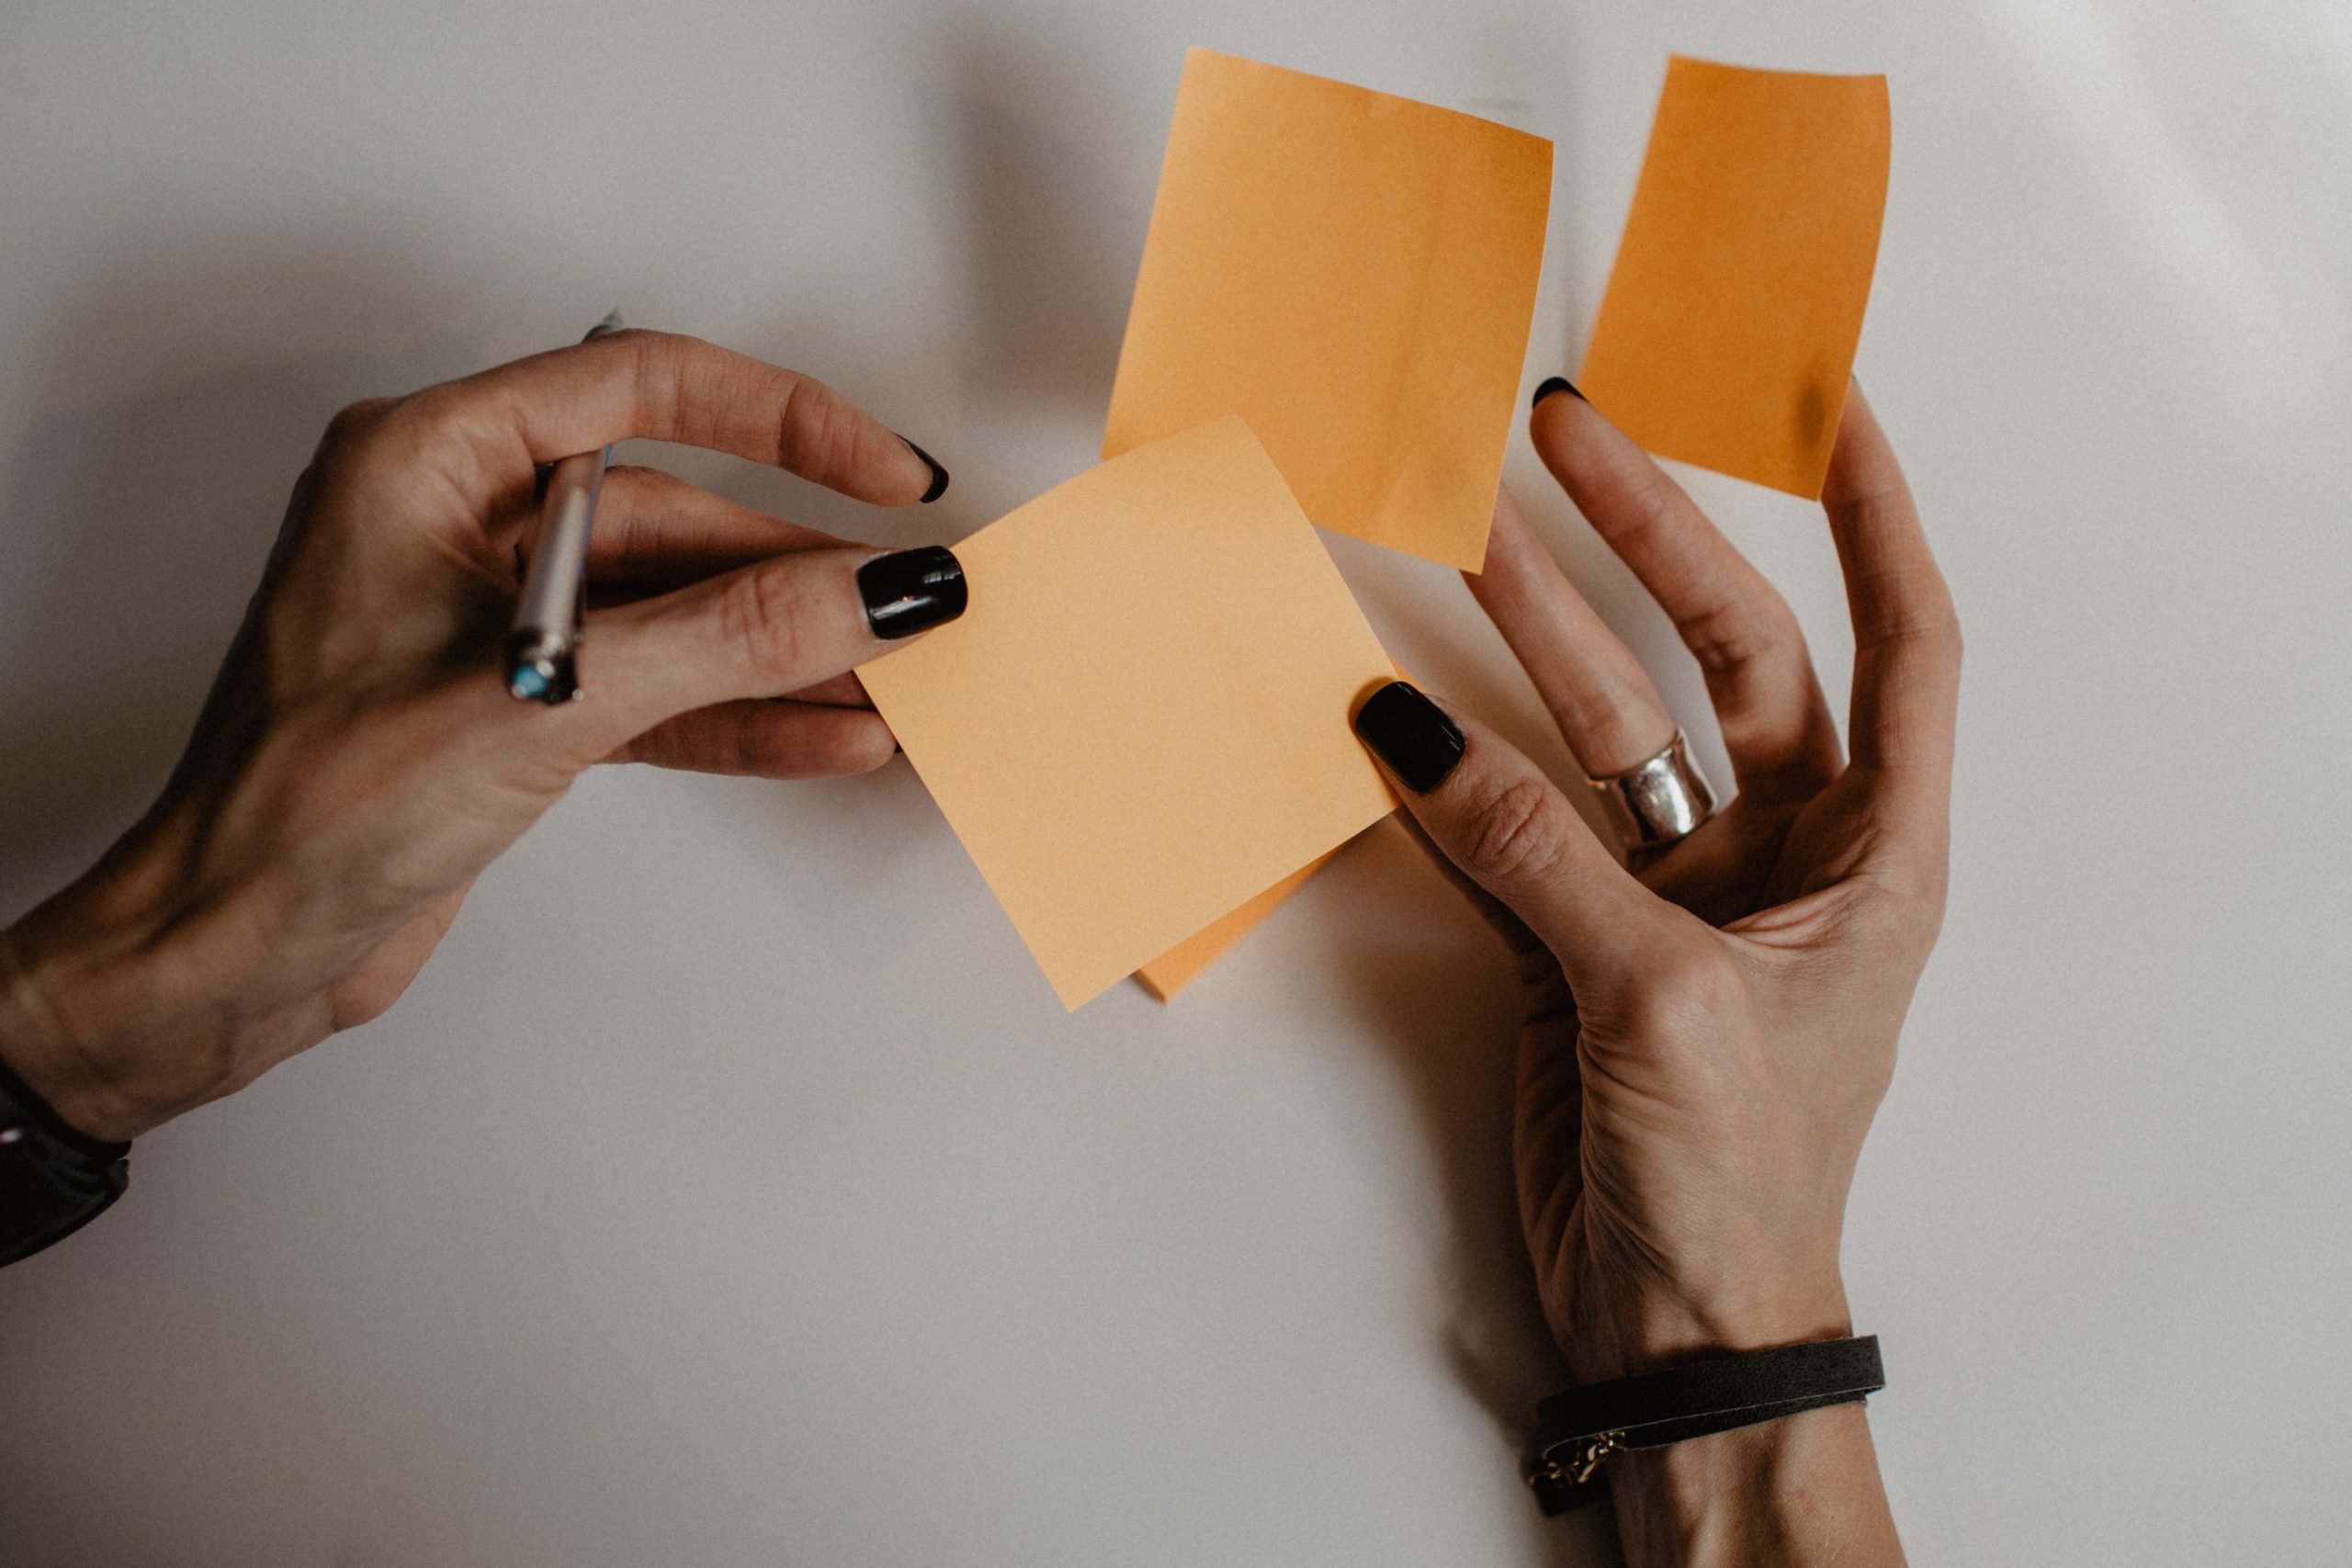 A woman's hands holding sticky notes.